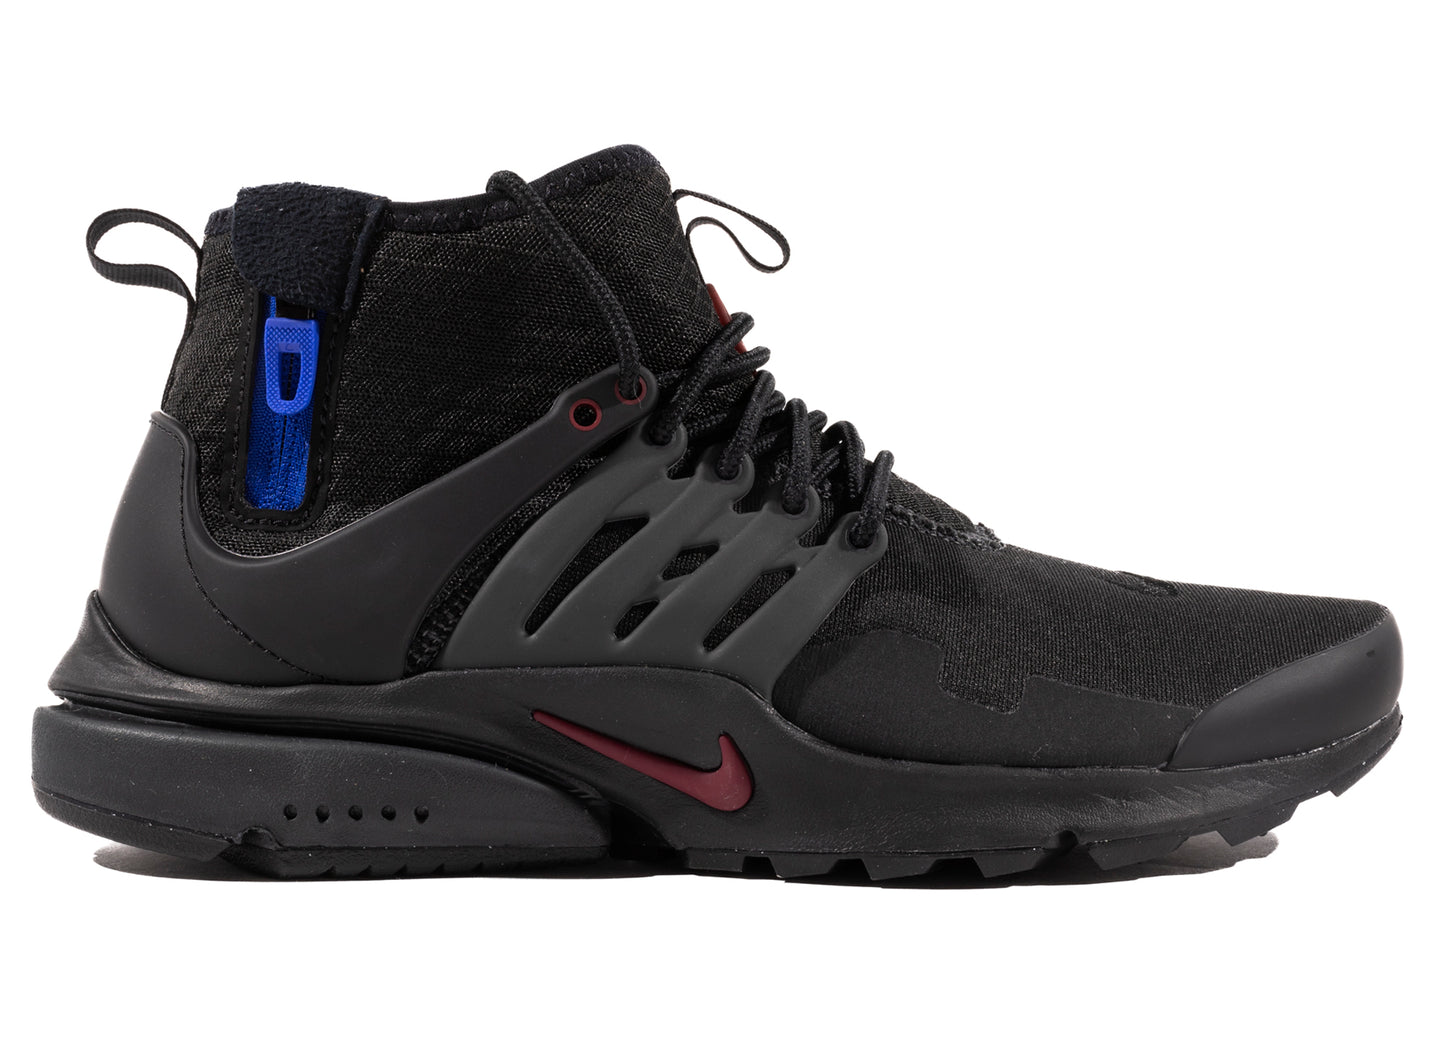 Nike Air Presto Mid Utility Men's Shoes Black-Team Red-Anthracite-Racer  Blue dc8751-001 